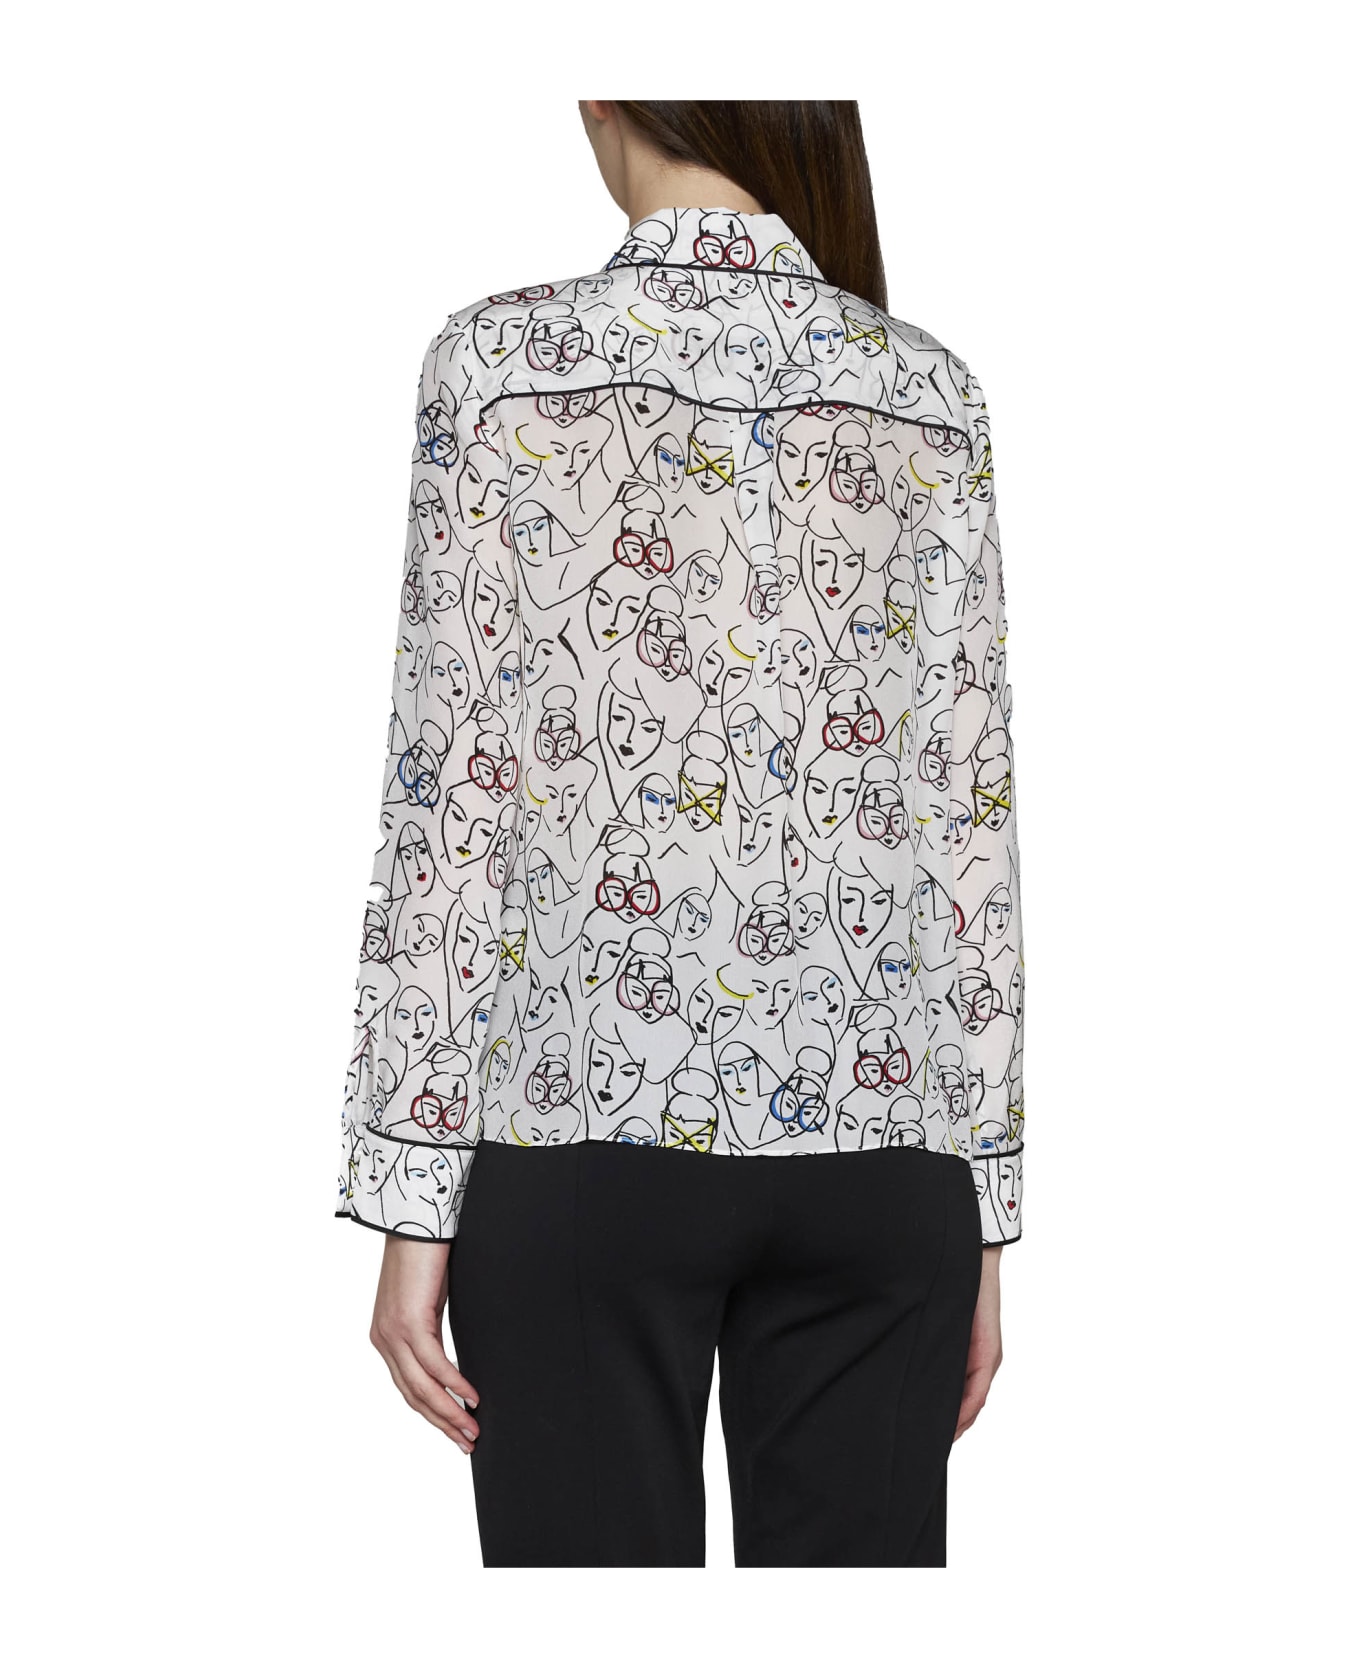 Alice + Olivia Shirt - Bisous stace ブラウス